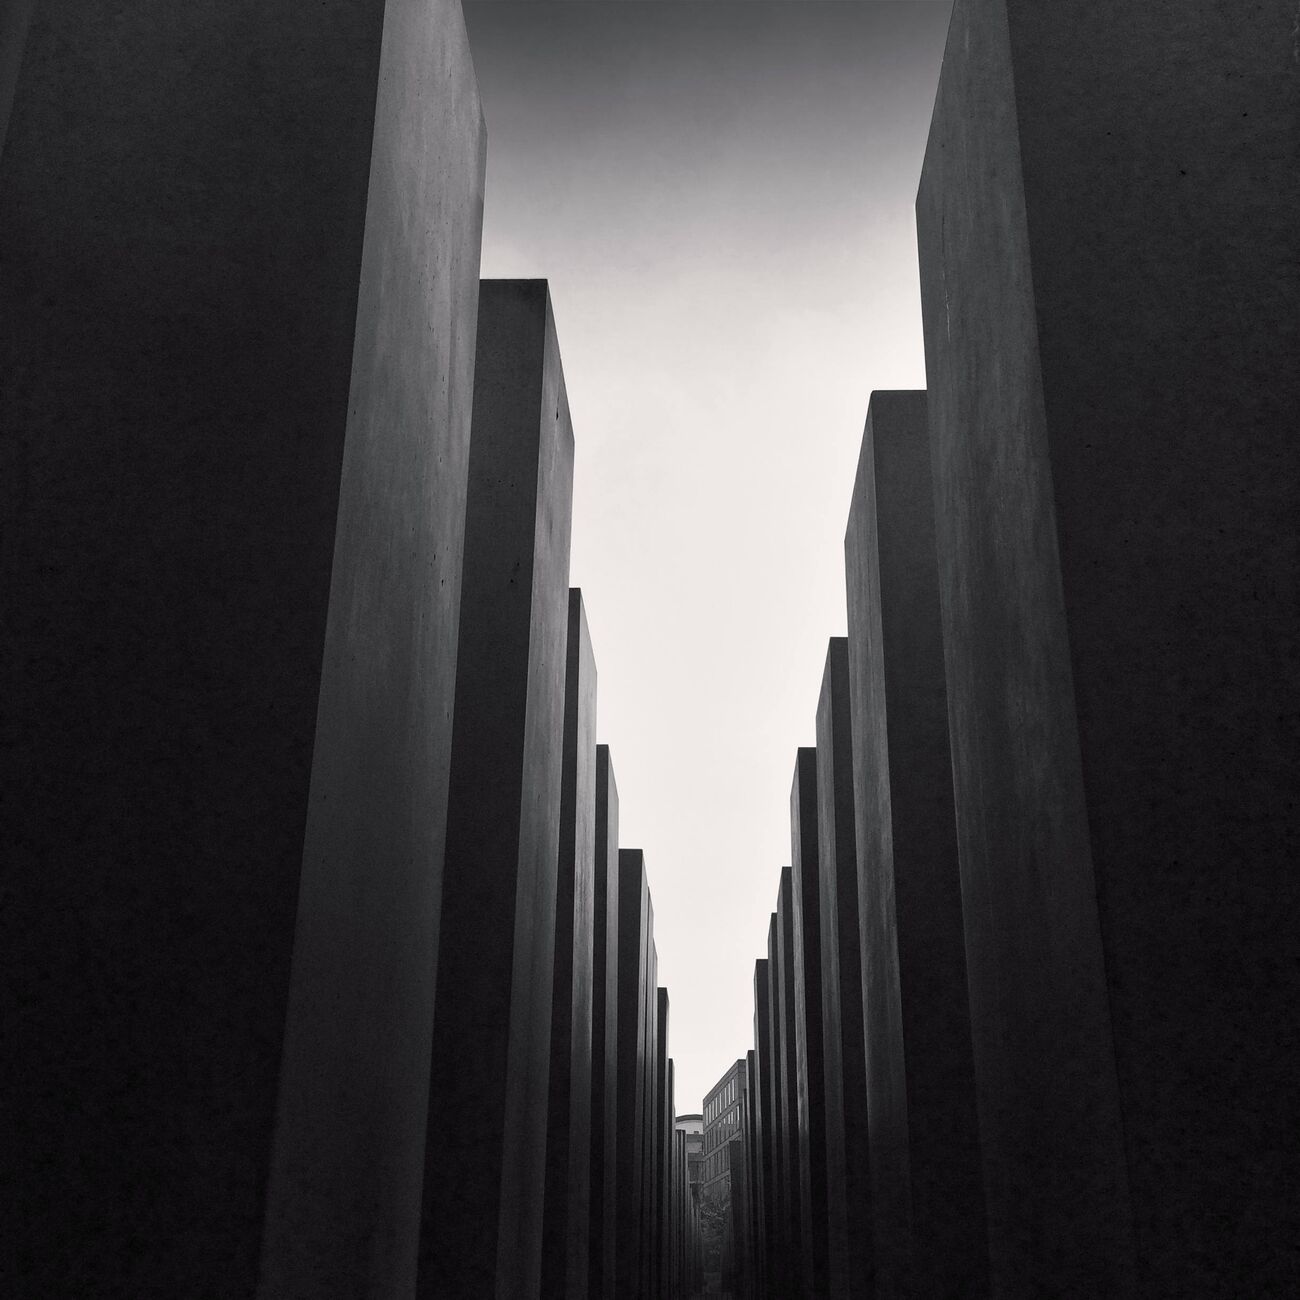 The Jews Memorial, Study 1, Berlin, Germany. October 2014. Ref-11466 - Denis Olivier Photography